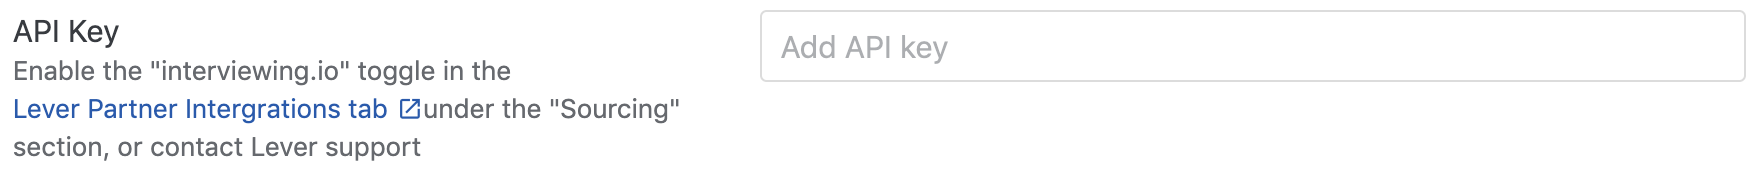 API Key field in interviewing.io configuration form.